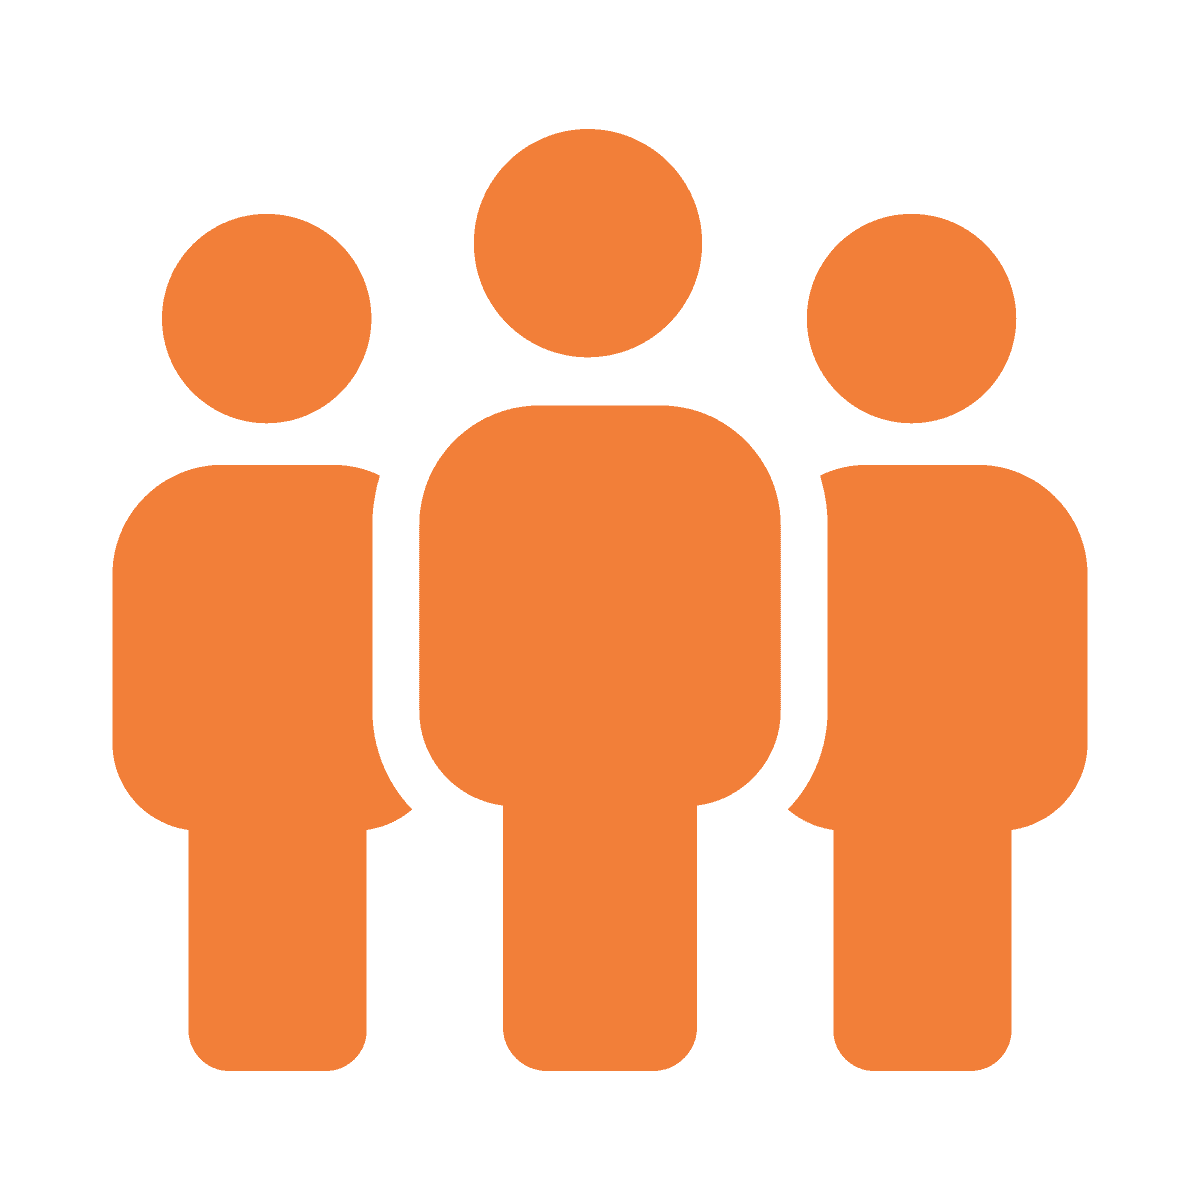 icon showing three people